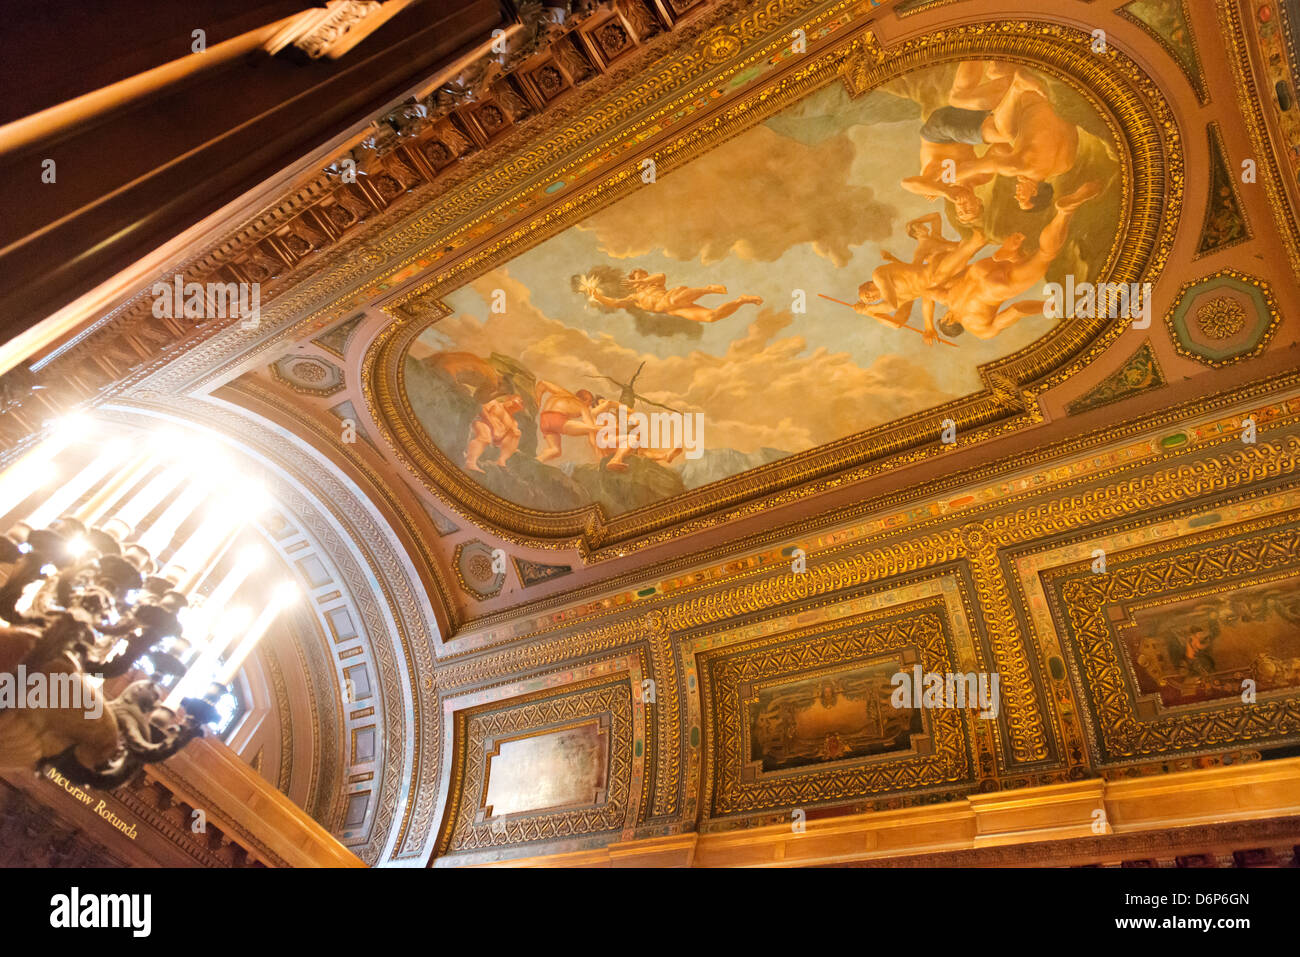 Ceiling mural in the main branch of the New York Public Library. Stock Photo